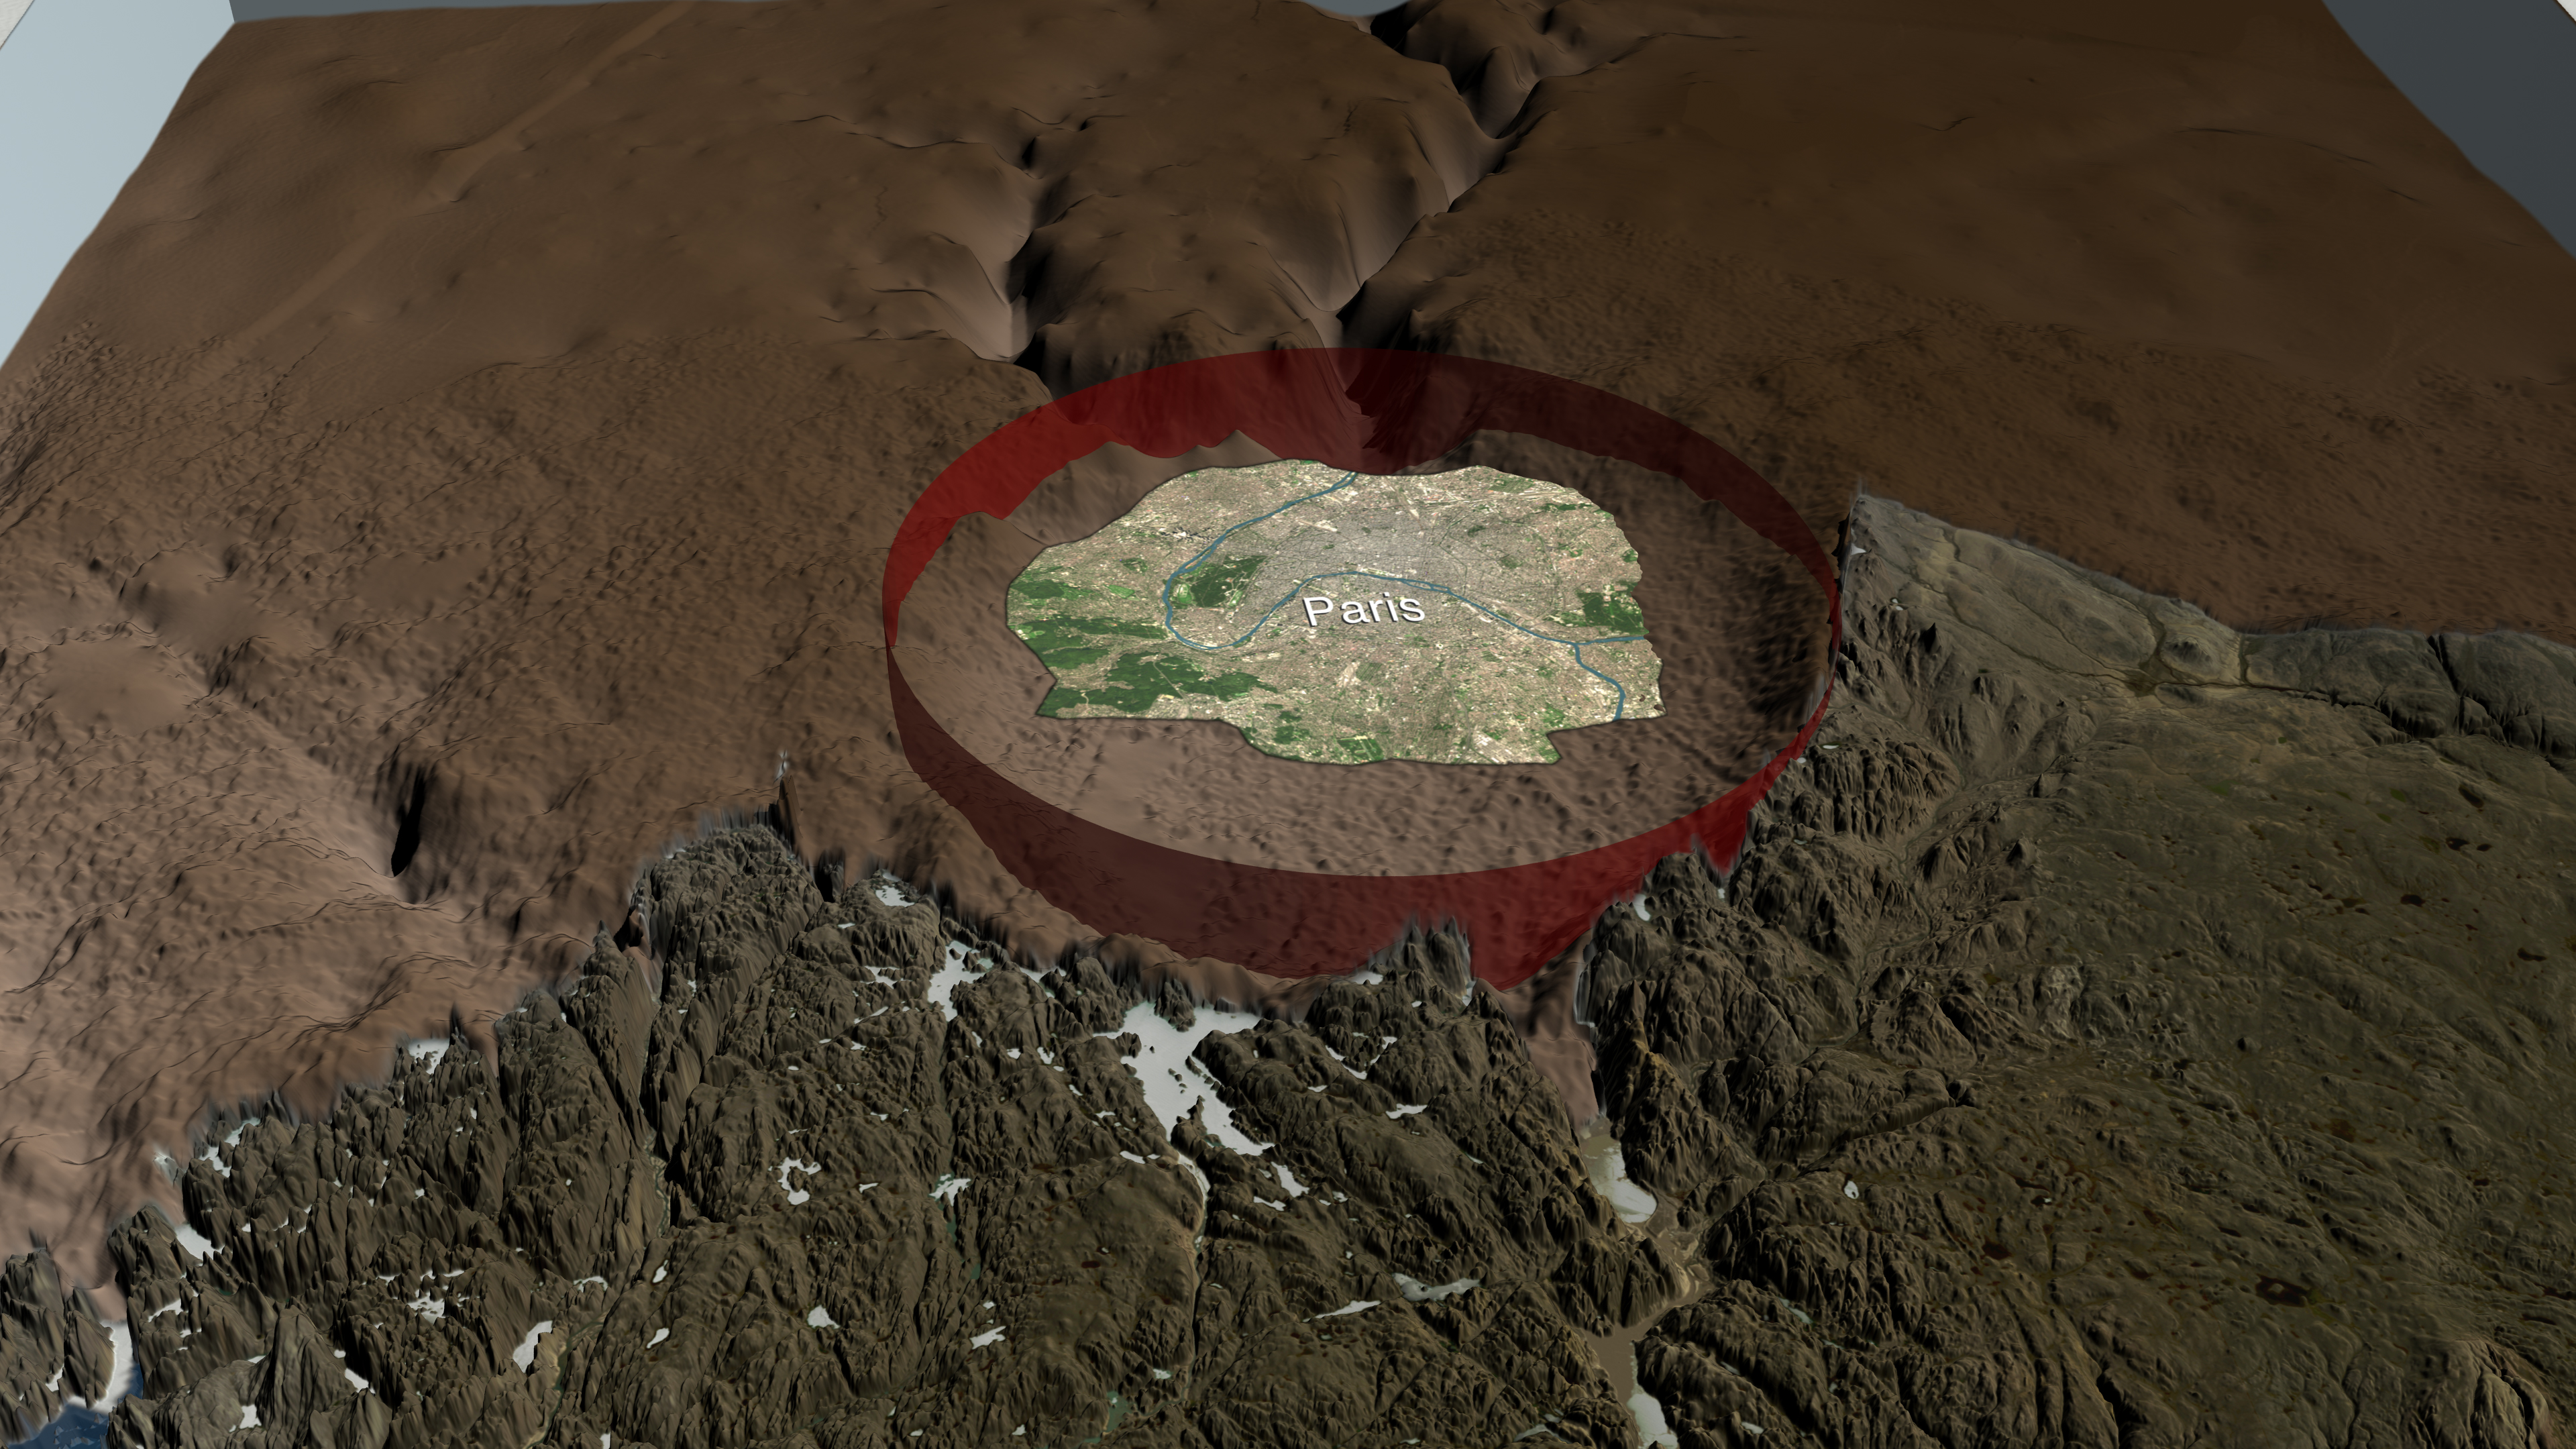 Crater Lurks Beneath the Ice - related image preview